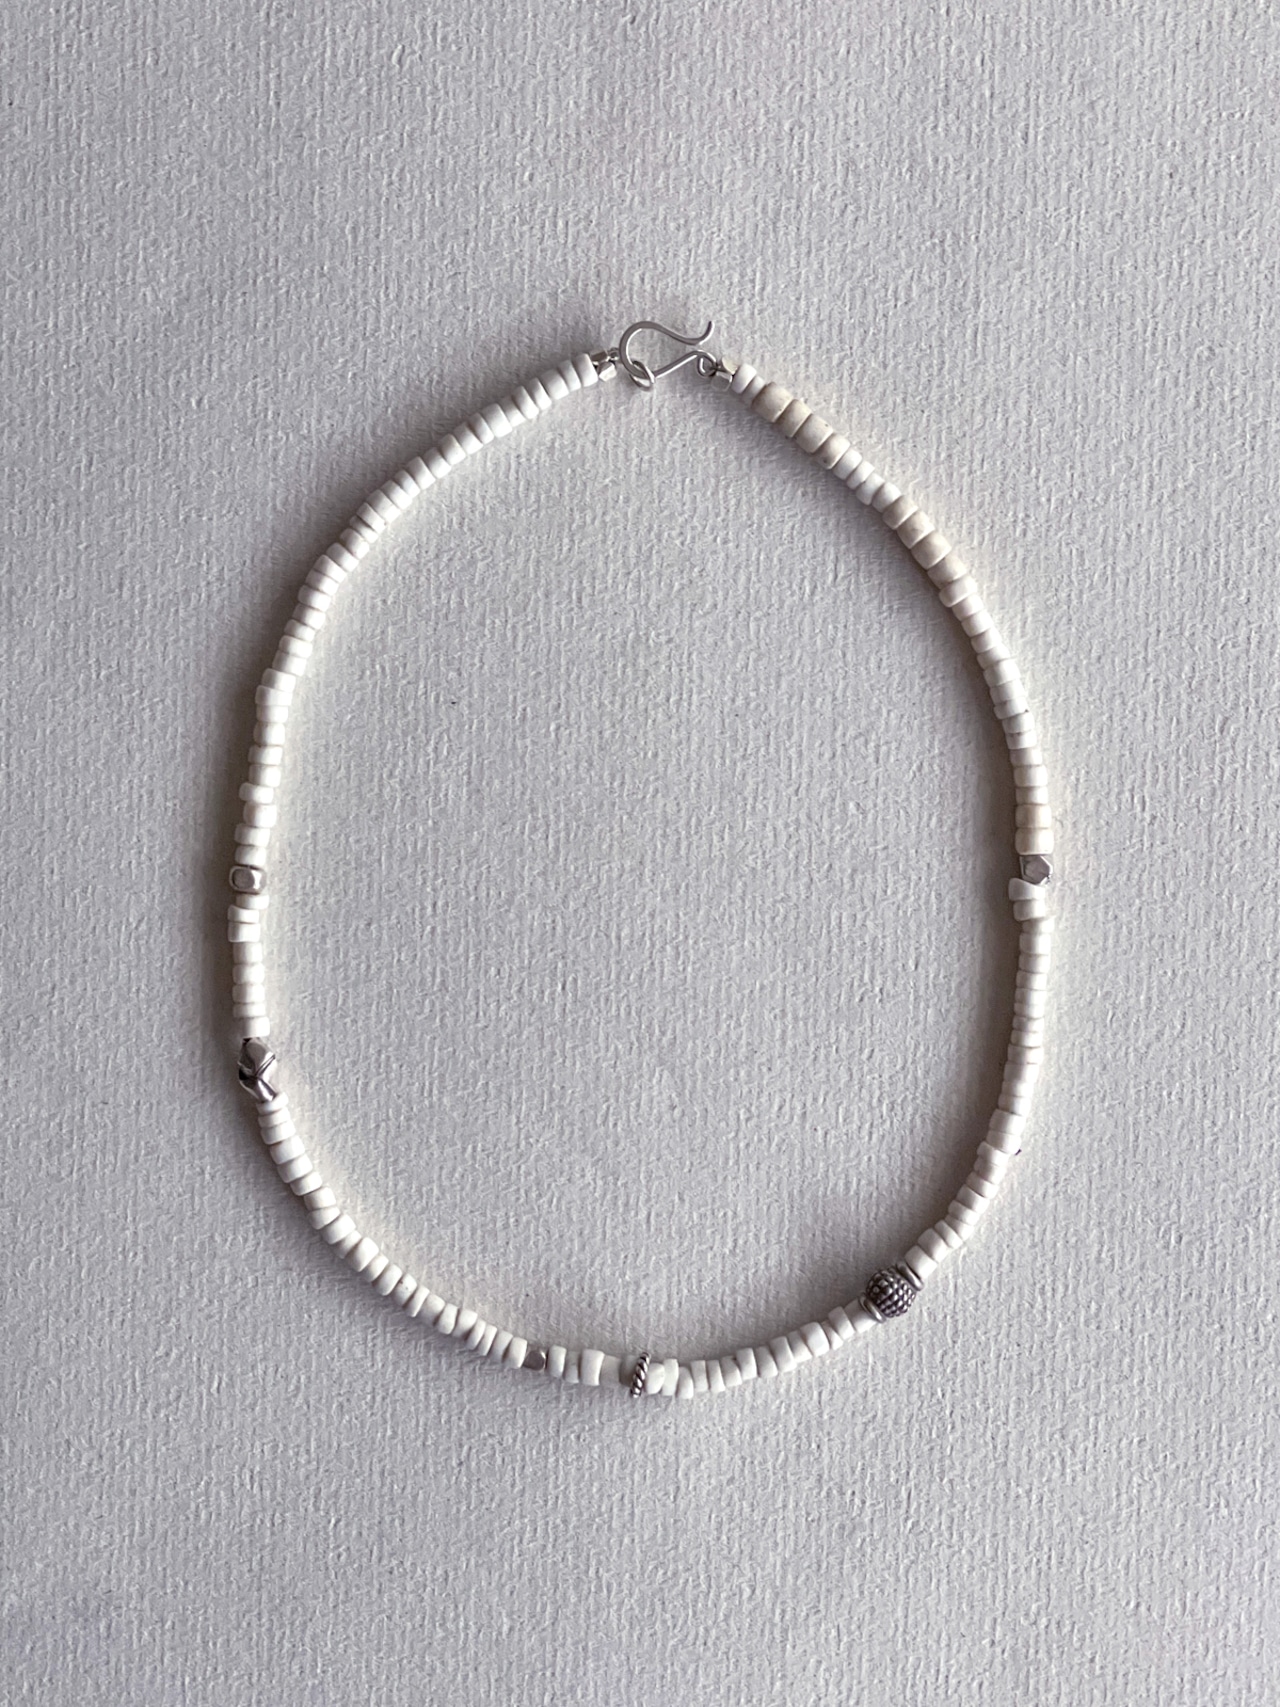 tay original／Beads necklace（beads×silver）